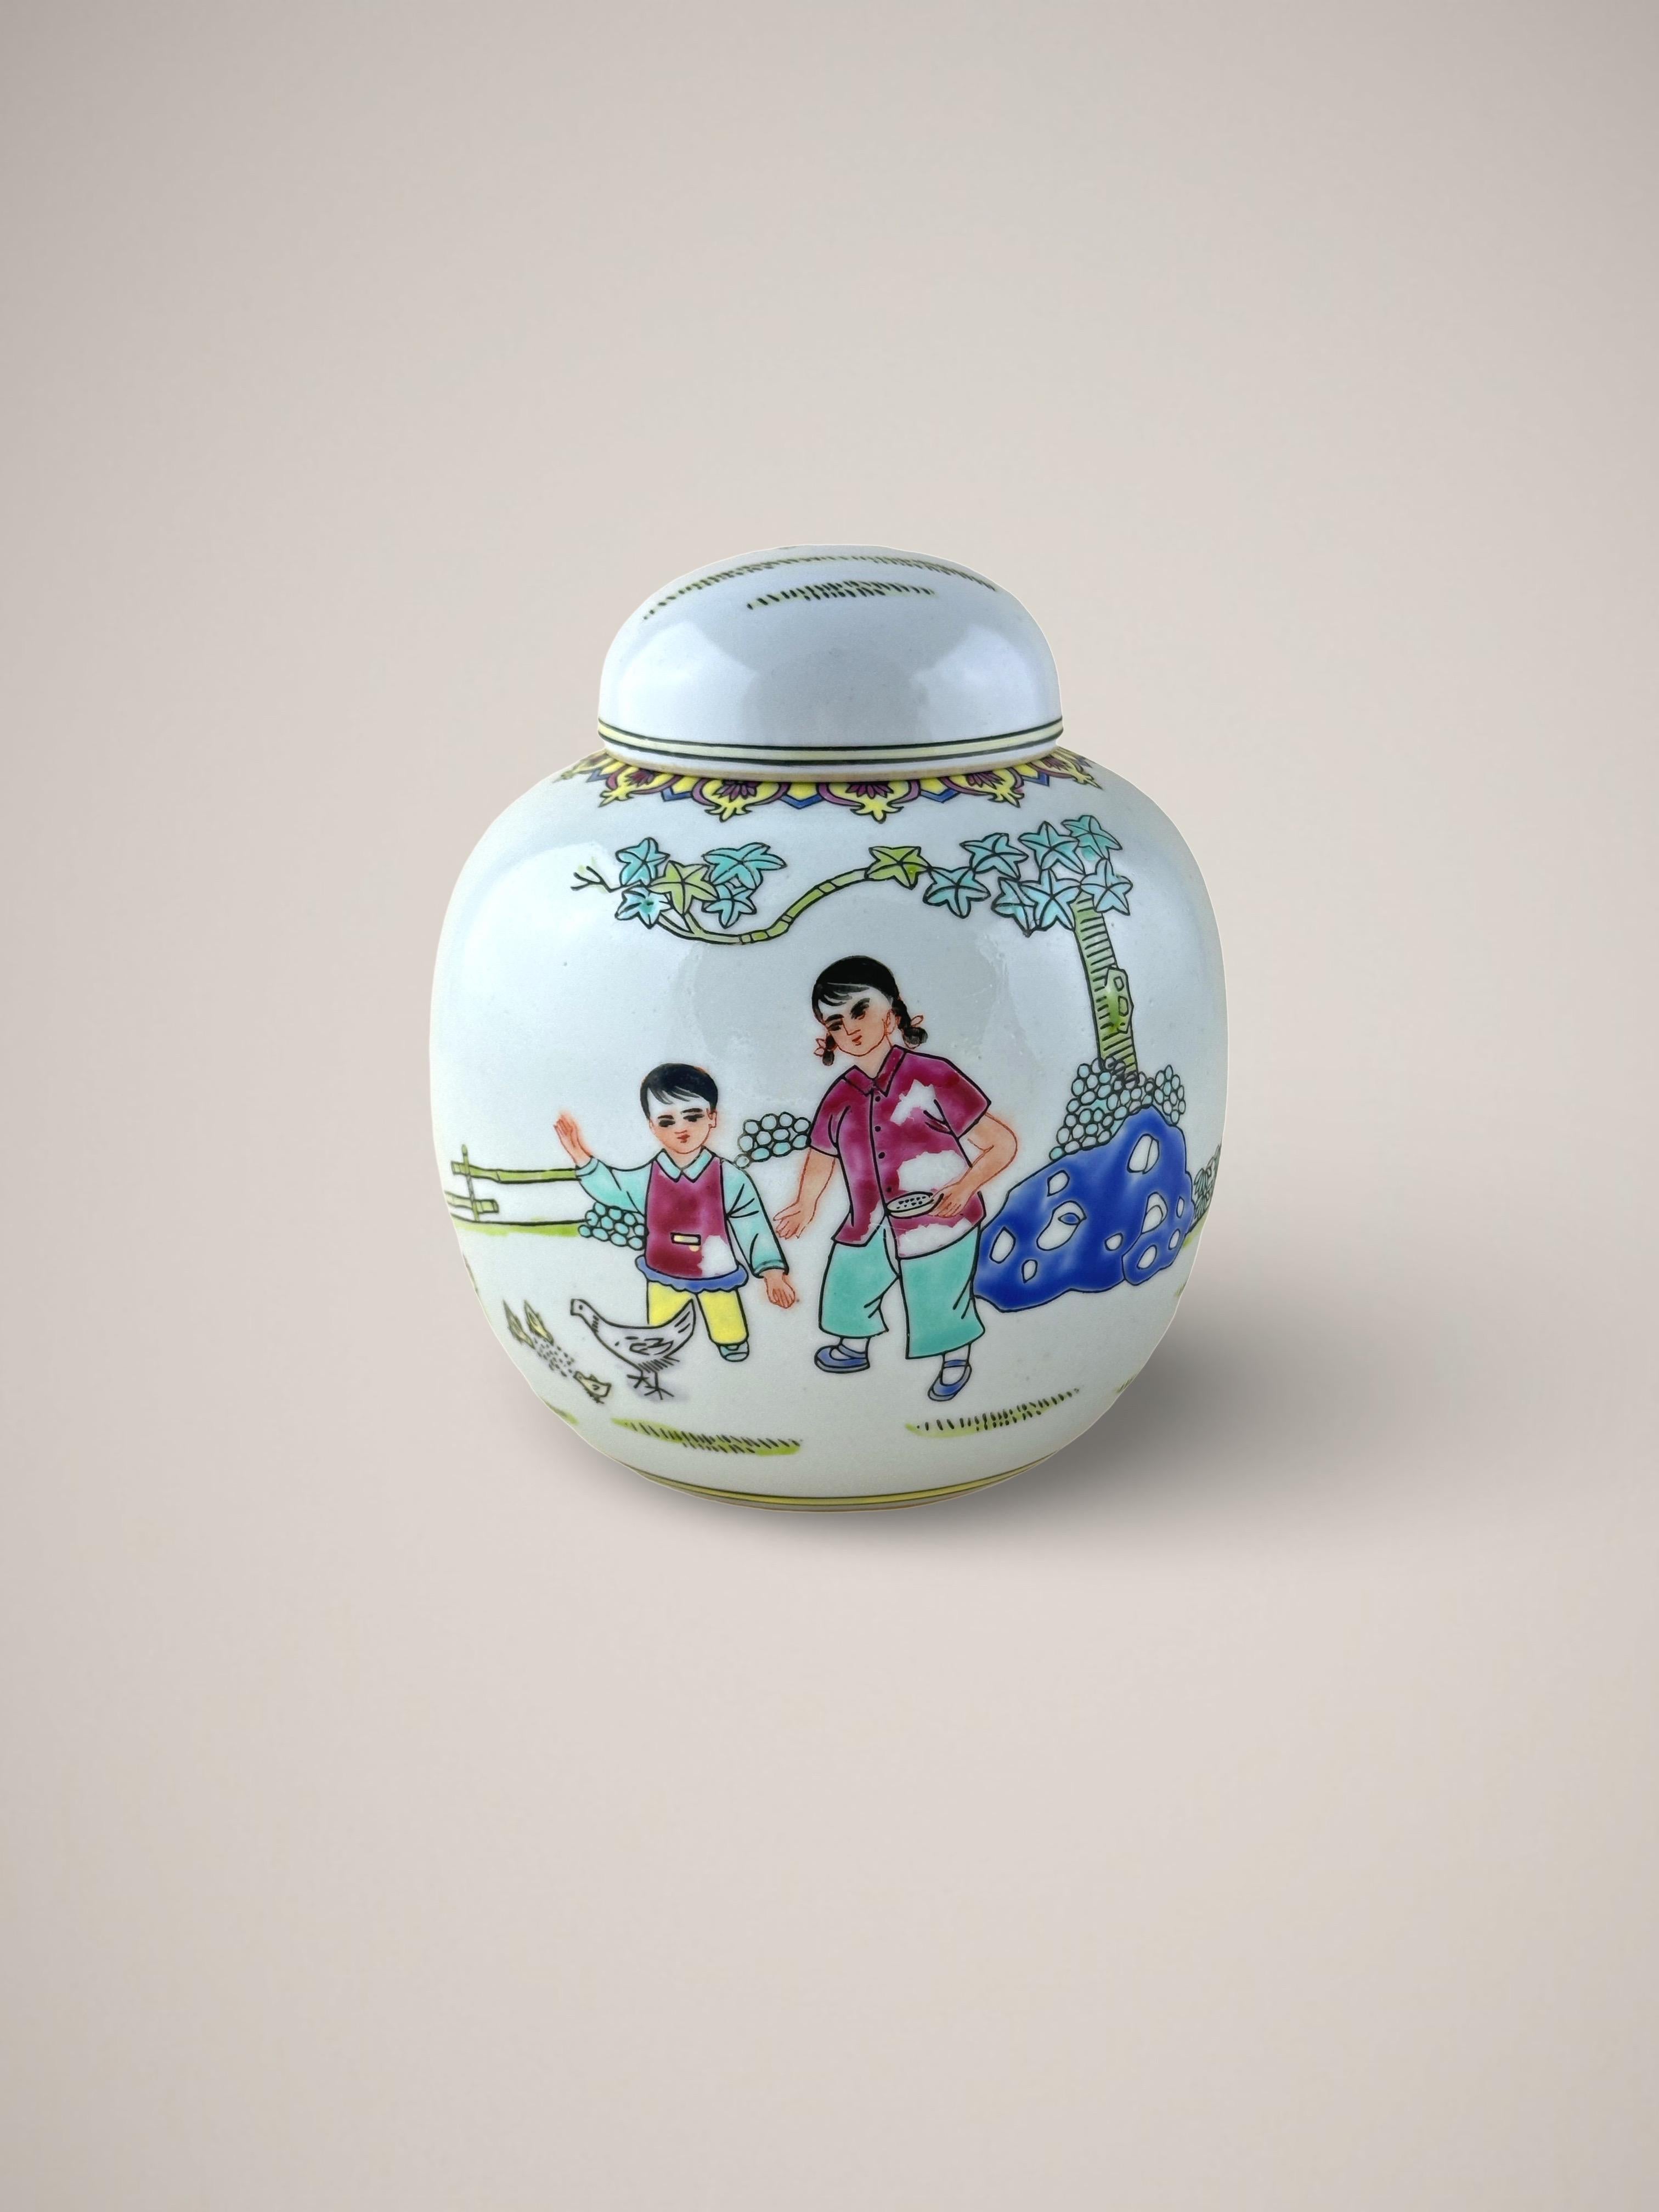 A colorful vintage ginger jar, crafted in Jingdezhen, China in the 1970s, is a beautiful example of wucai porcelain. 

Decorated with a vibrant figural scene depicting a mother and child feeding birds in a natural setting. Bold tones of ultramarine